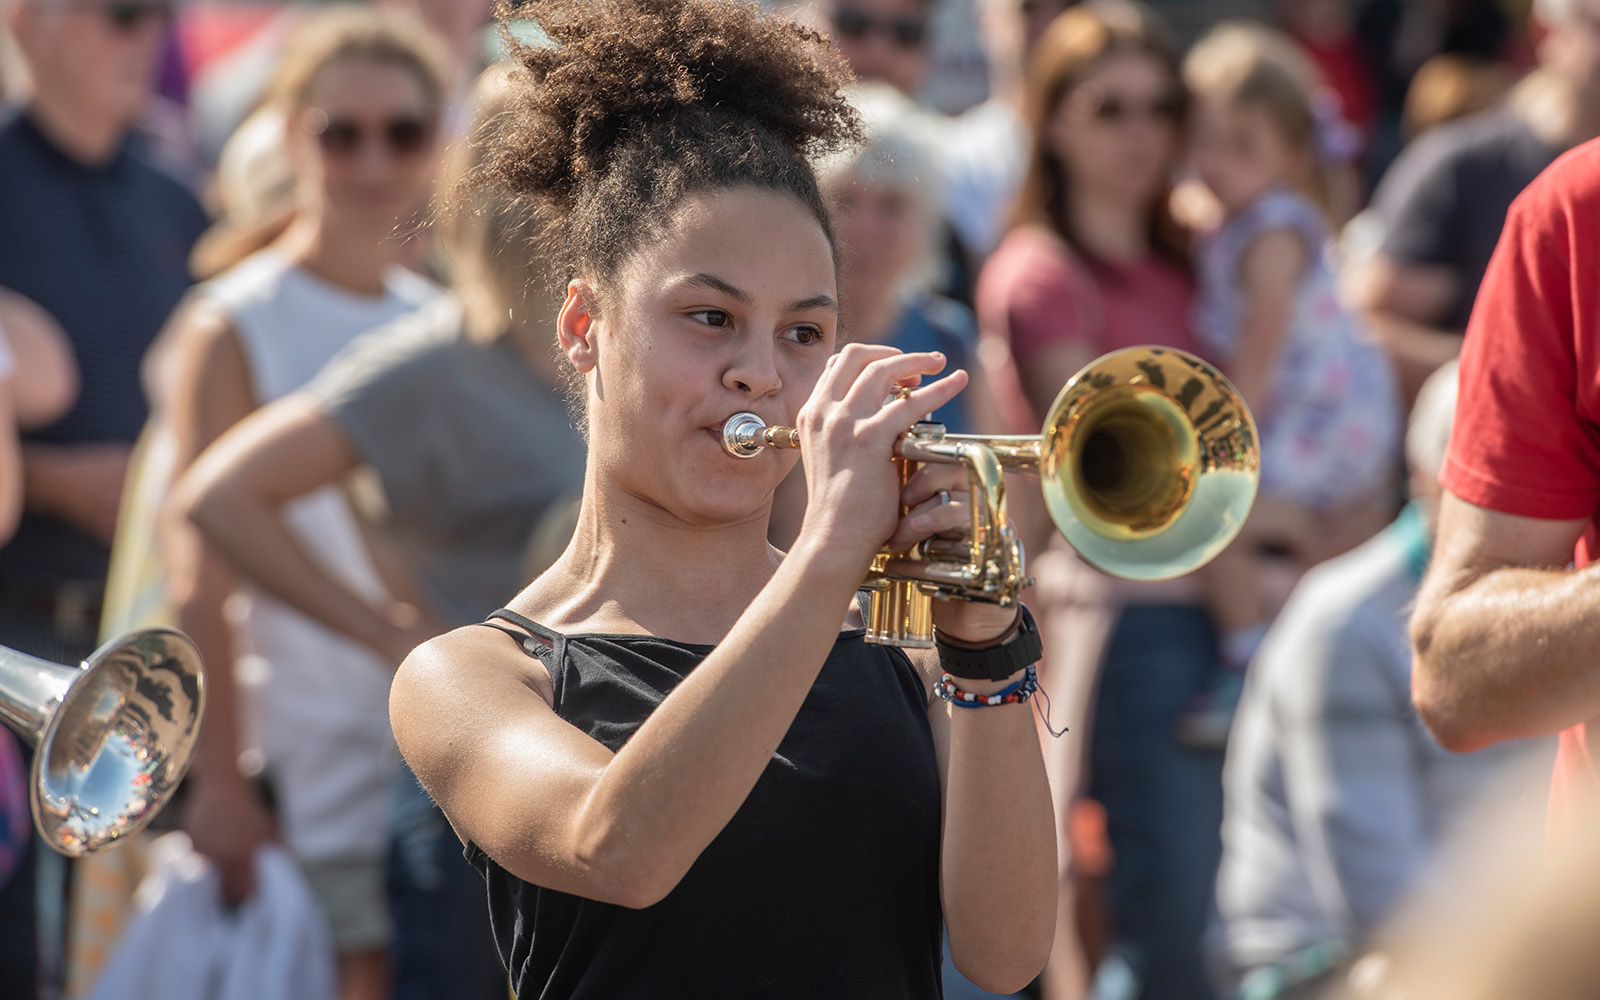 A young woman playing the trumpet